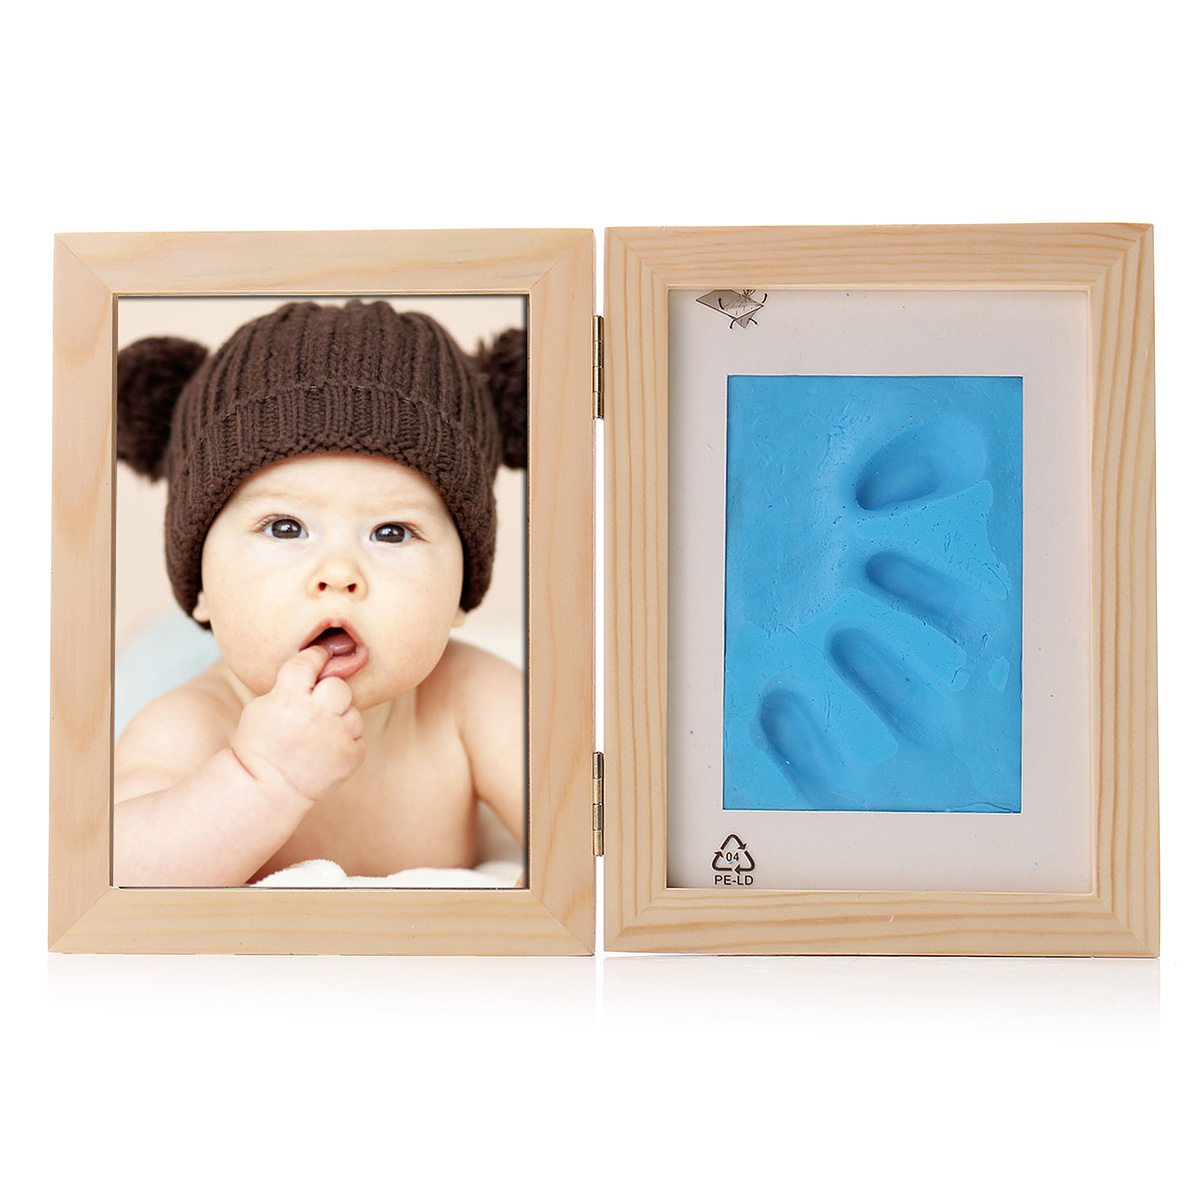 New Born Baby Hand Foot Print Soft Clay Photo Frame